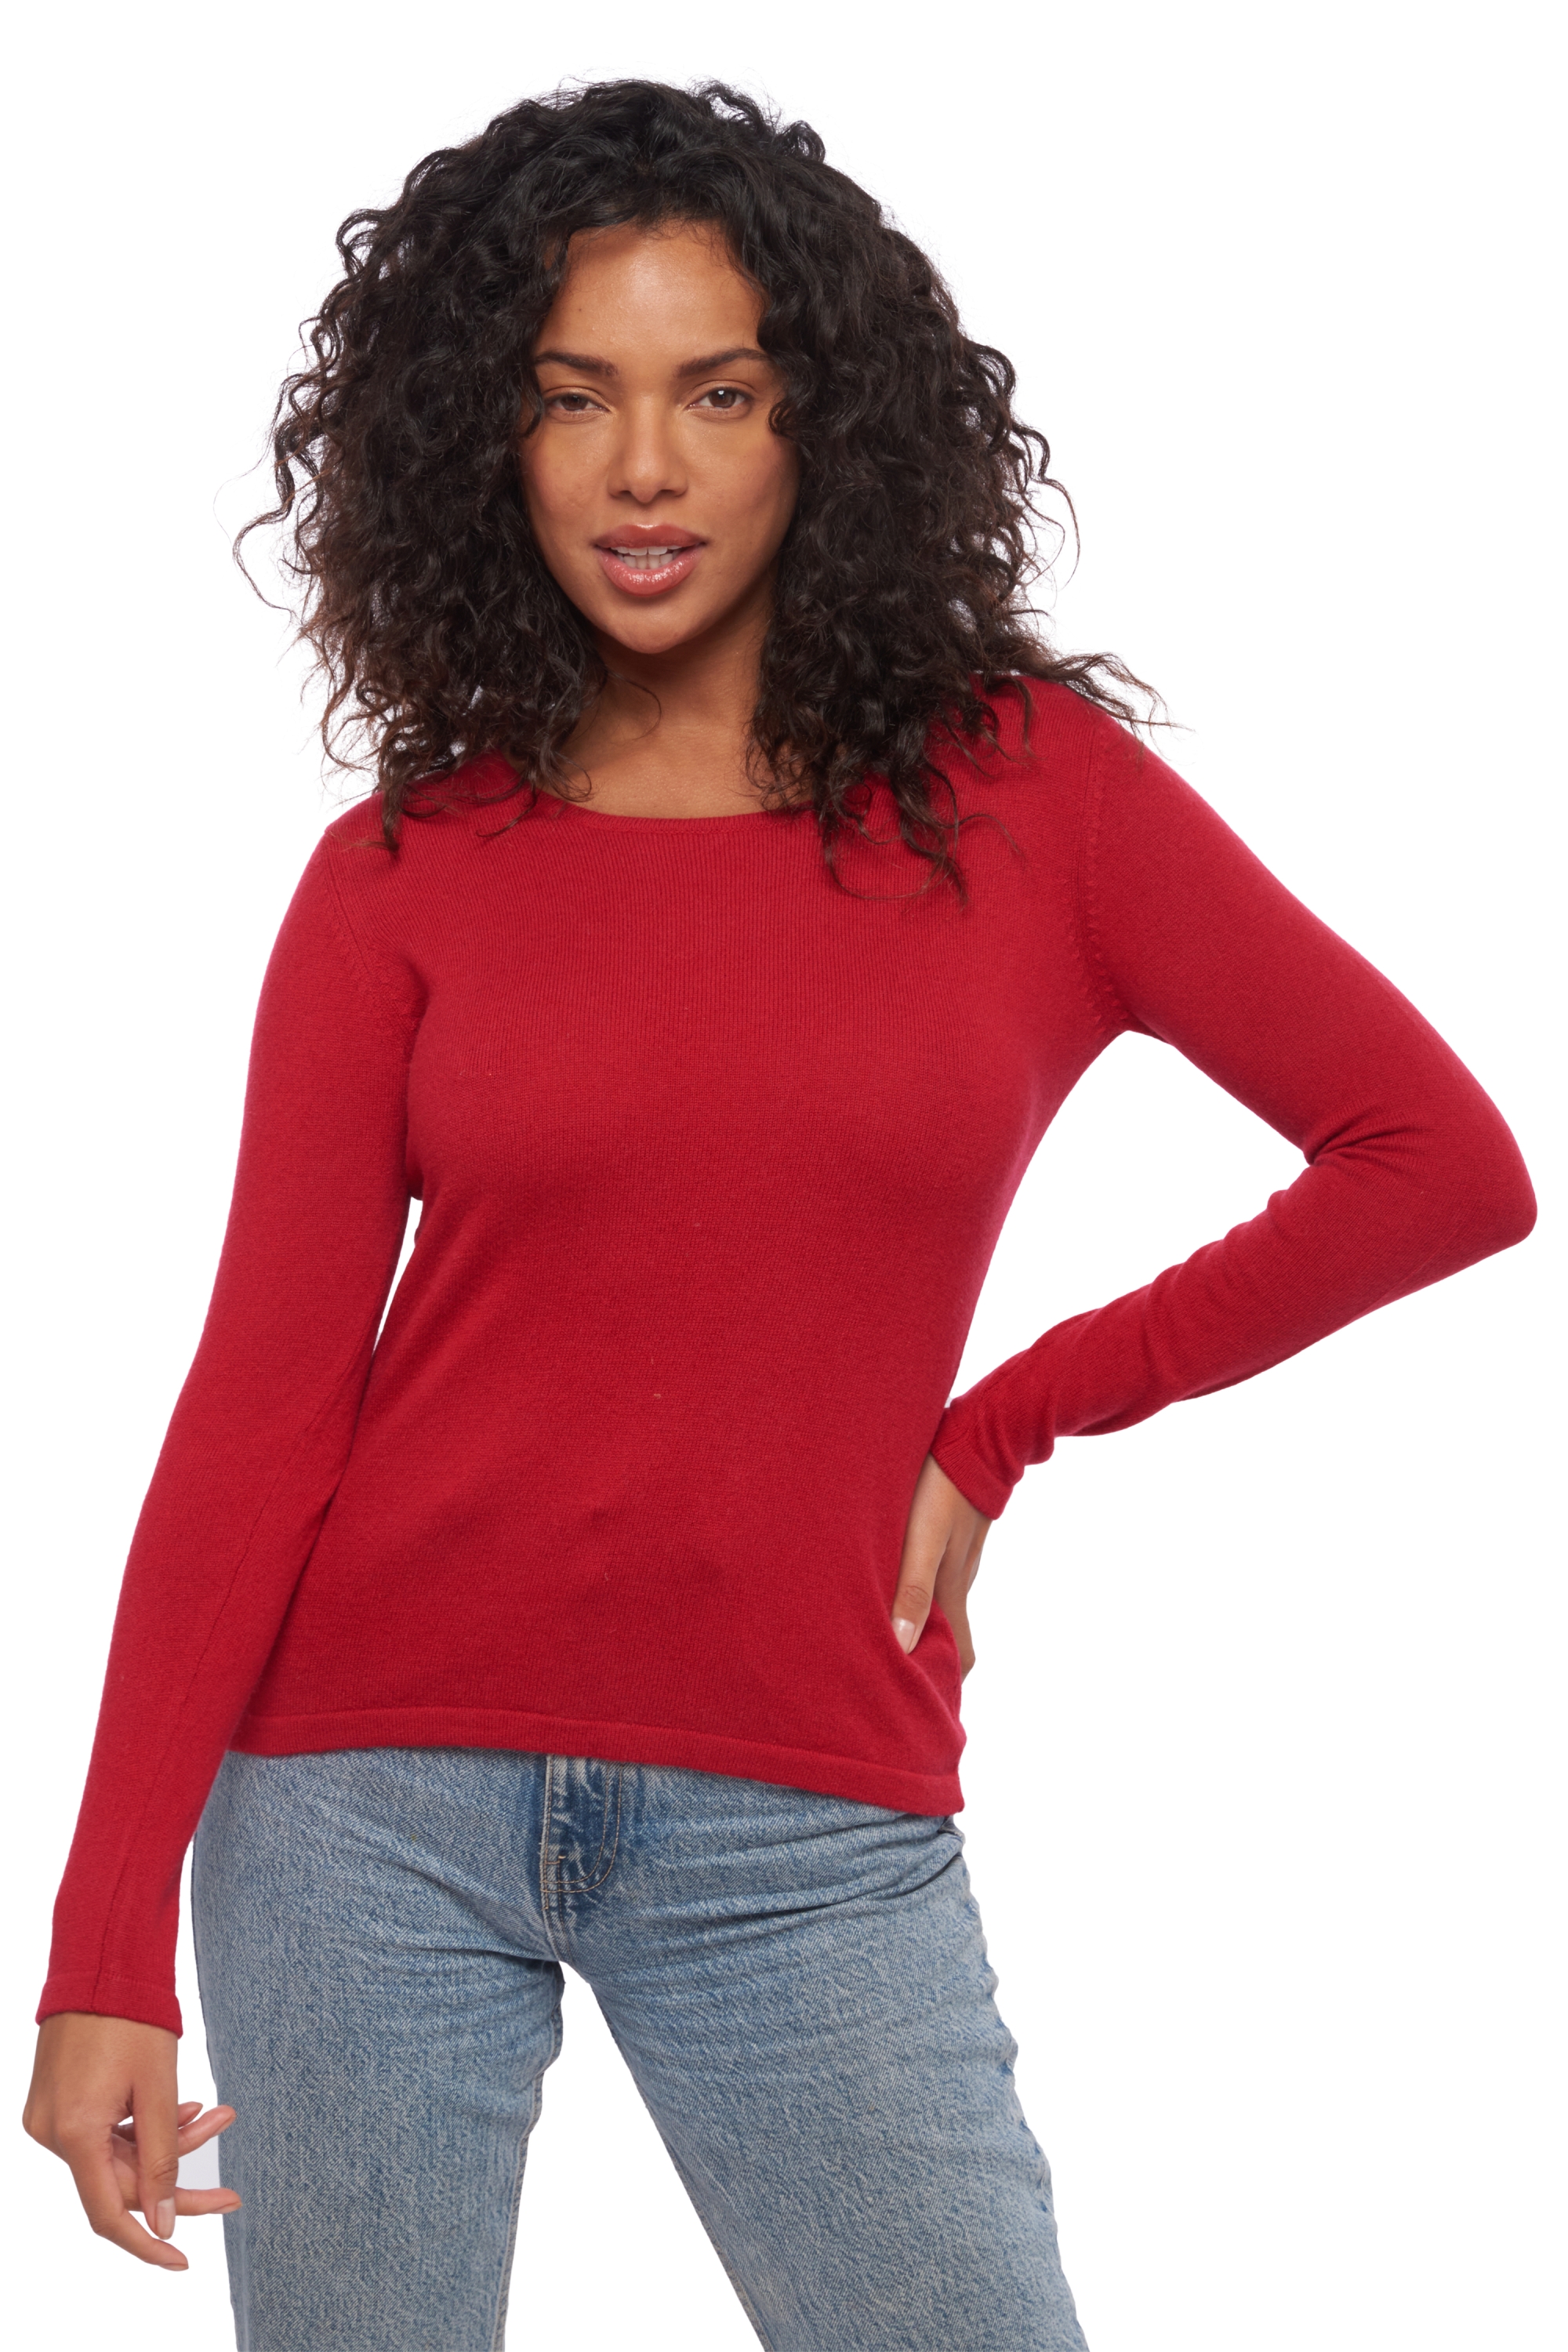 Cachemire pull femme col rond solange rouge velours xl